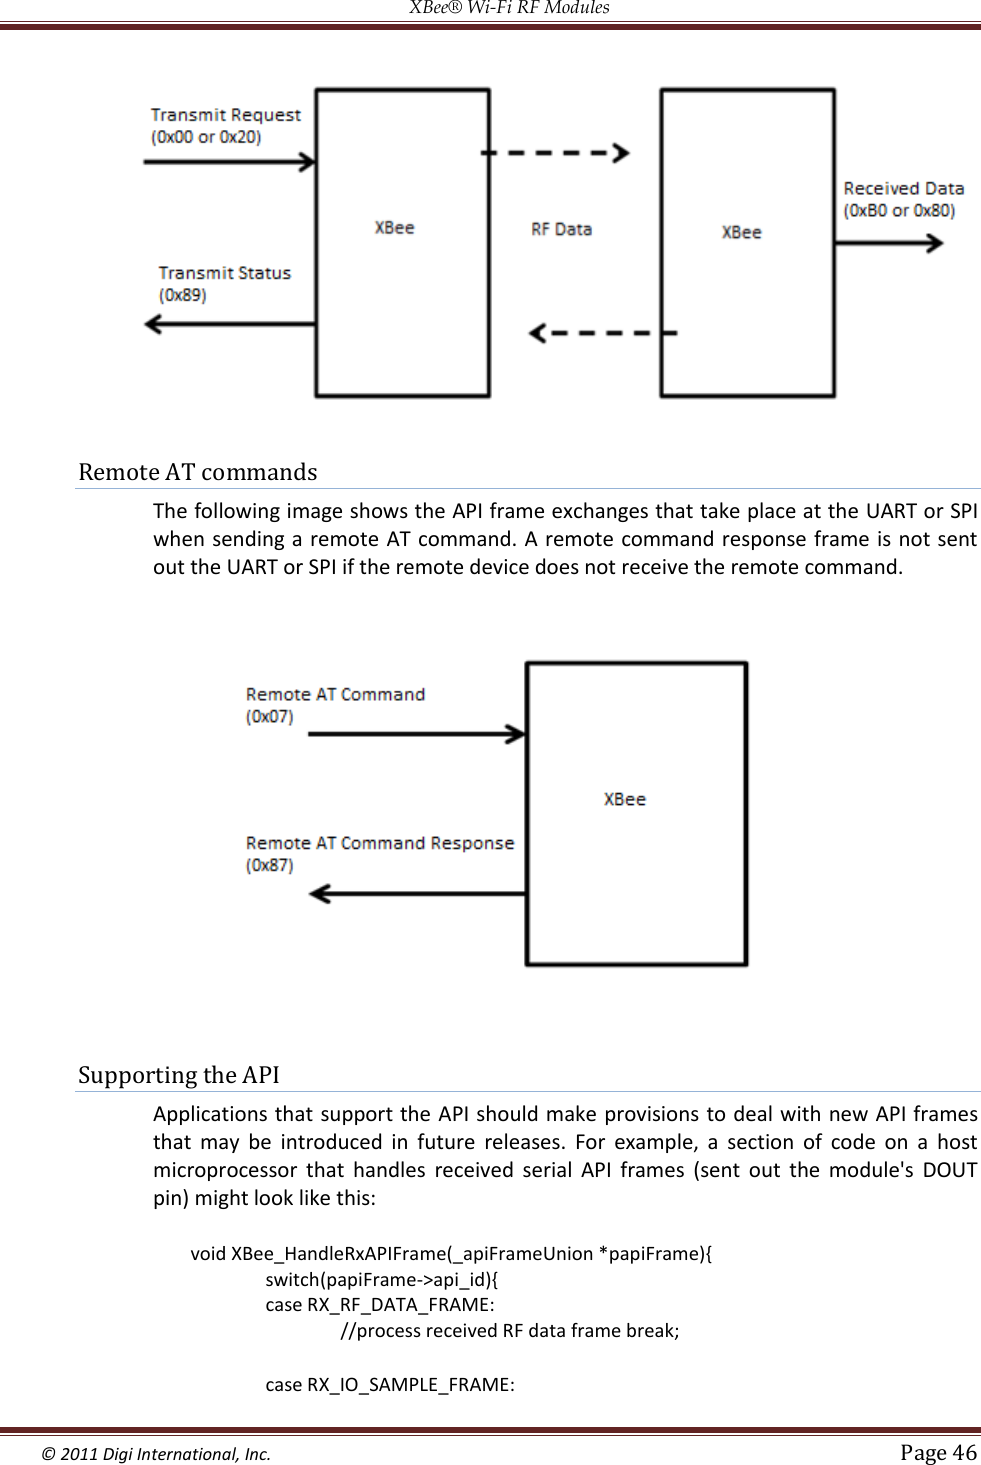 XBee® Wi-Fi RF Modules  © 2011 Digi International, Inc.   Page 46                Remote AT commands The following image shows the API frame exchanges that take place at the UART or SPI when sending a remote AT command. A remote command response frame is not sent out the UART or SPI if the remote device does not receive the remote command.                            Supporting the API Applications that support the API should make provisions to deal with new API frames that  may  be  introduced  in  future  releases.  For  example,  a  section  of  code  on  a  host microprocessor  that  handles  received  serial  API  frames  (sent  out  the  module&apos;s  DOUT pin) might look like this: void XBee_HandleRxAPIFrame(_apiFrameUnion *papiFrame){ switch(papiFrame-&gt;api_id){ case RX_RF_DATA_FRAME: //process received RF data frame break; case RX_IO_SAMPLE_FRAME: 